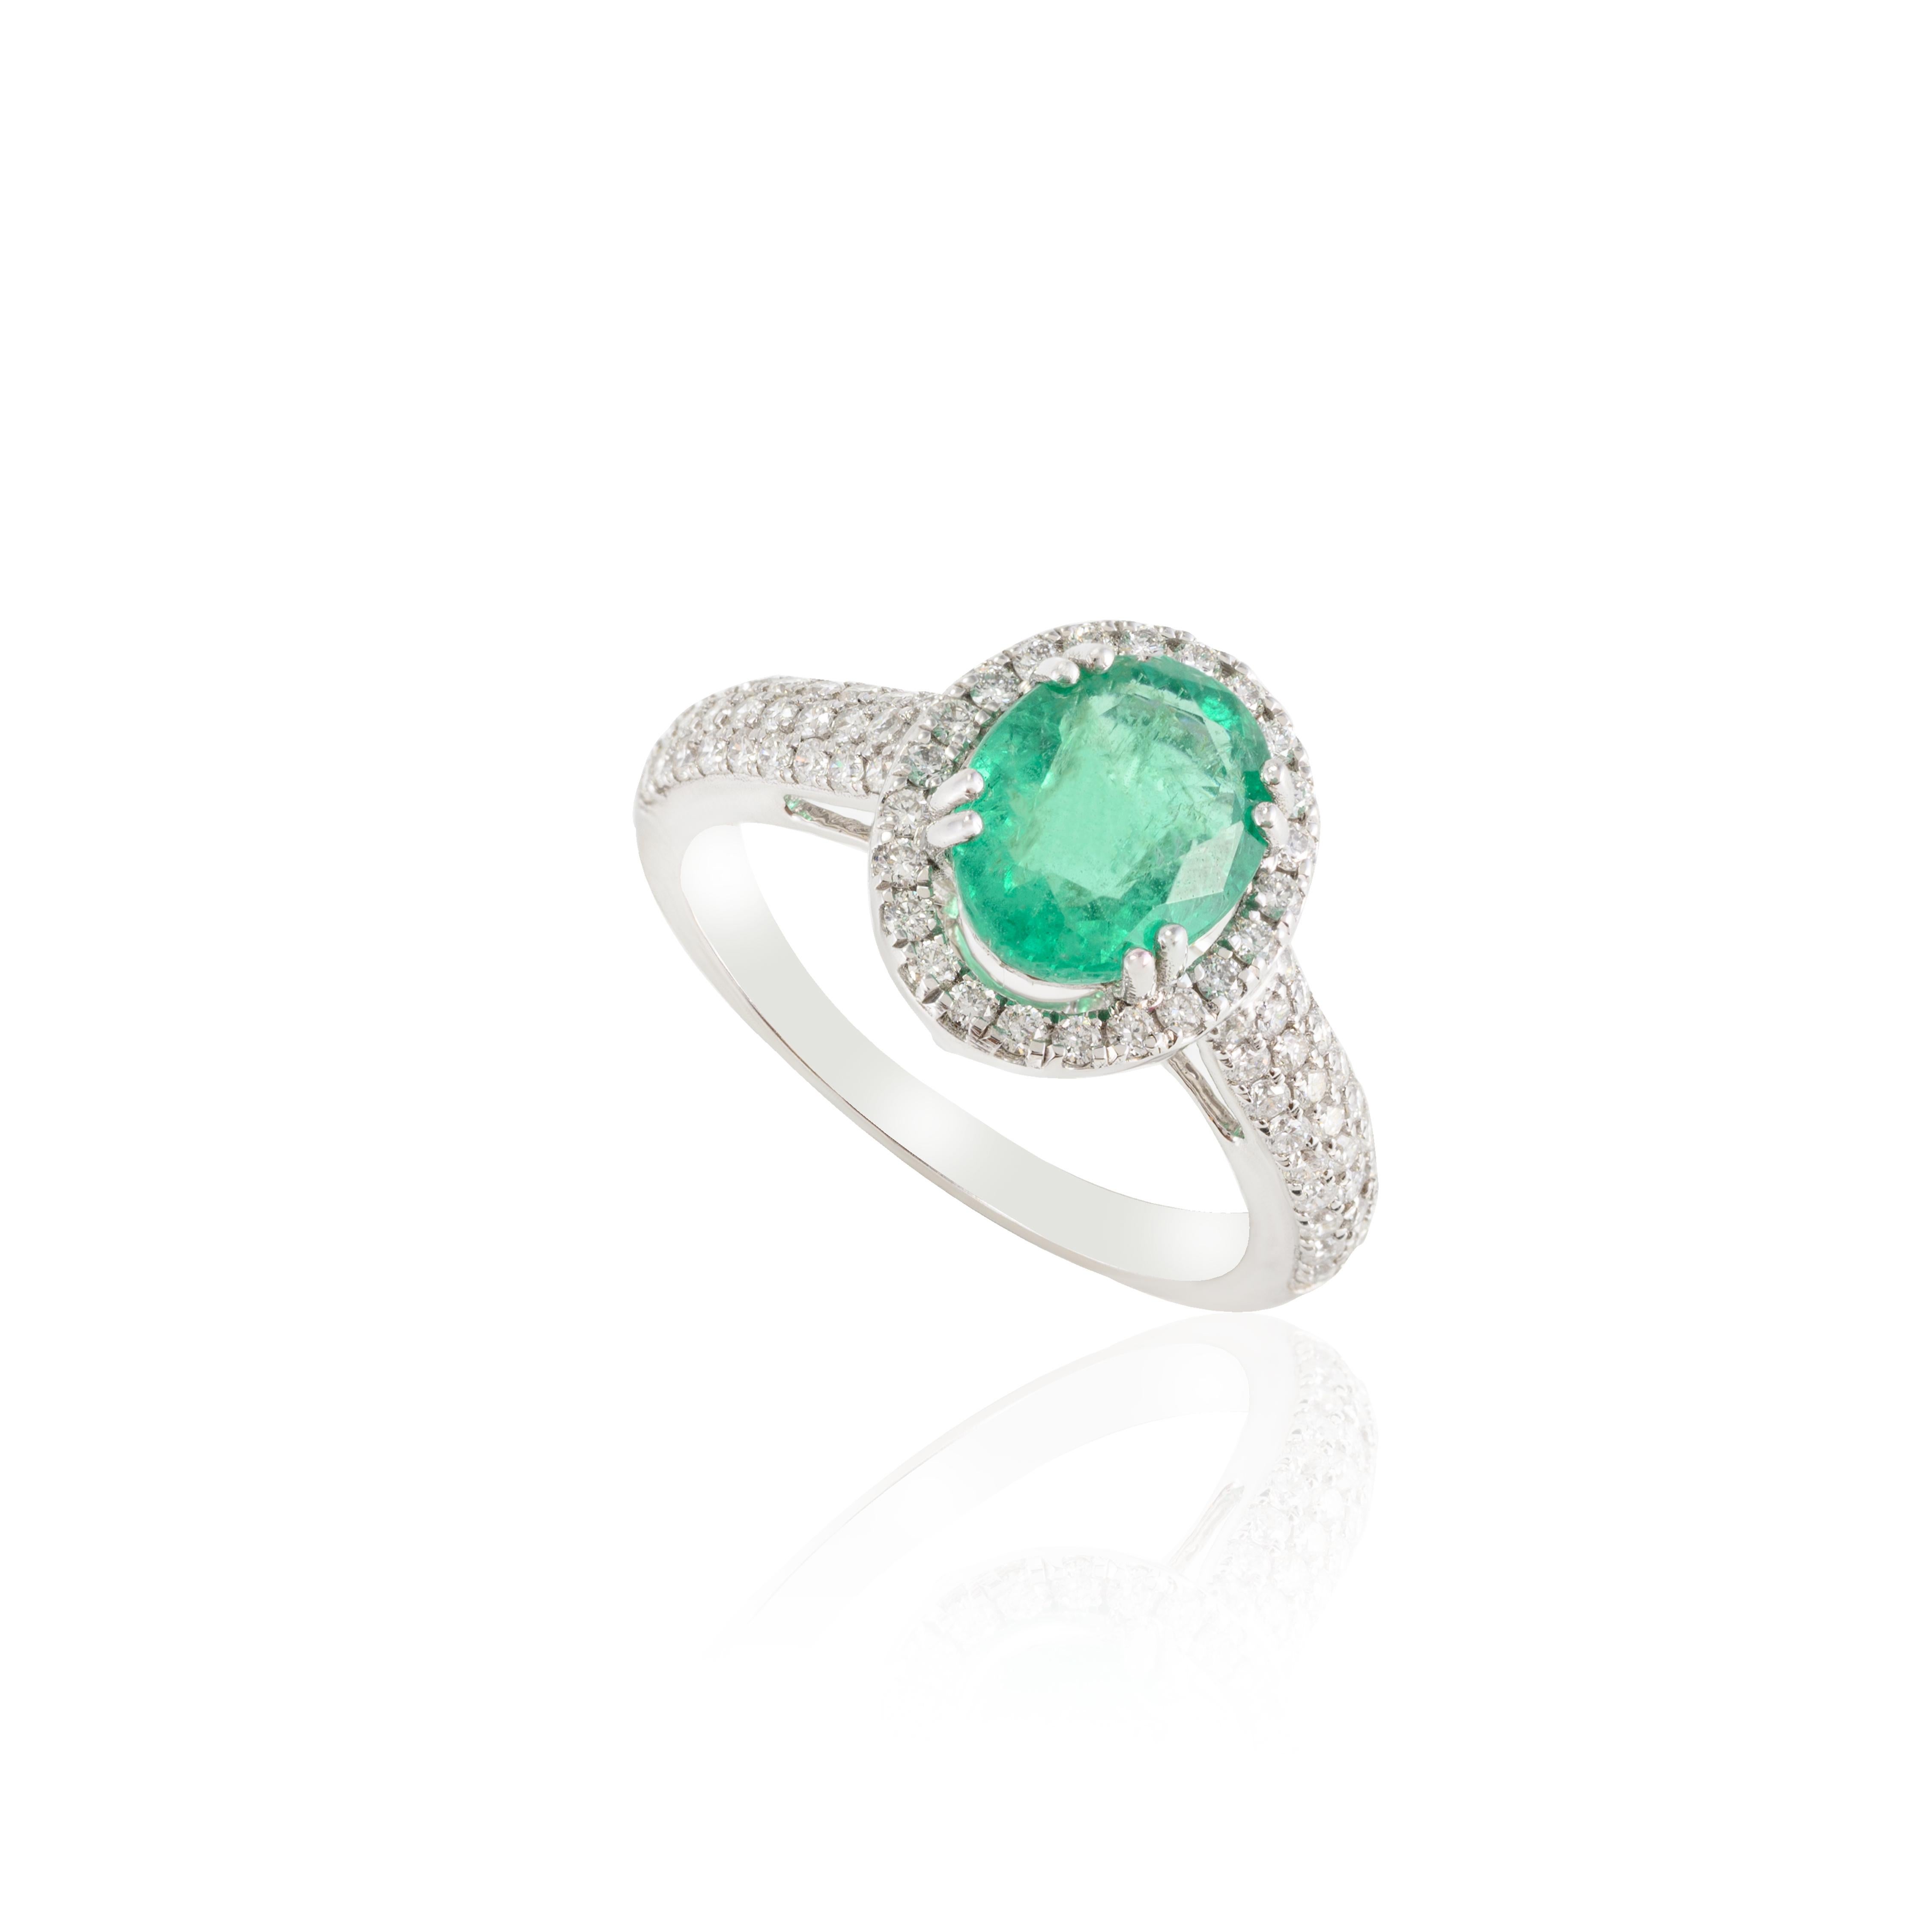 For Sale:  18k Solid White Gold Glamorous Emerald Halo Diamond Engagement Ring for Her 4